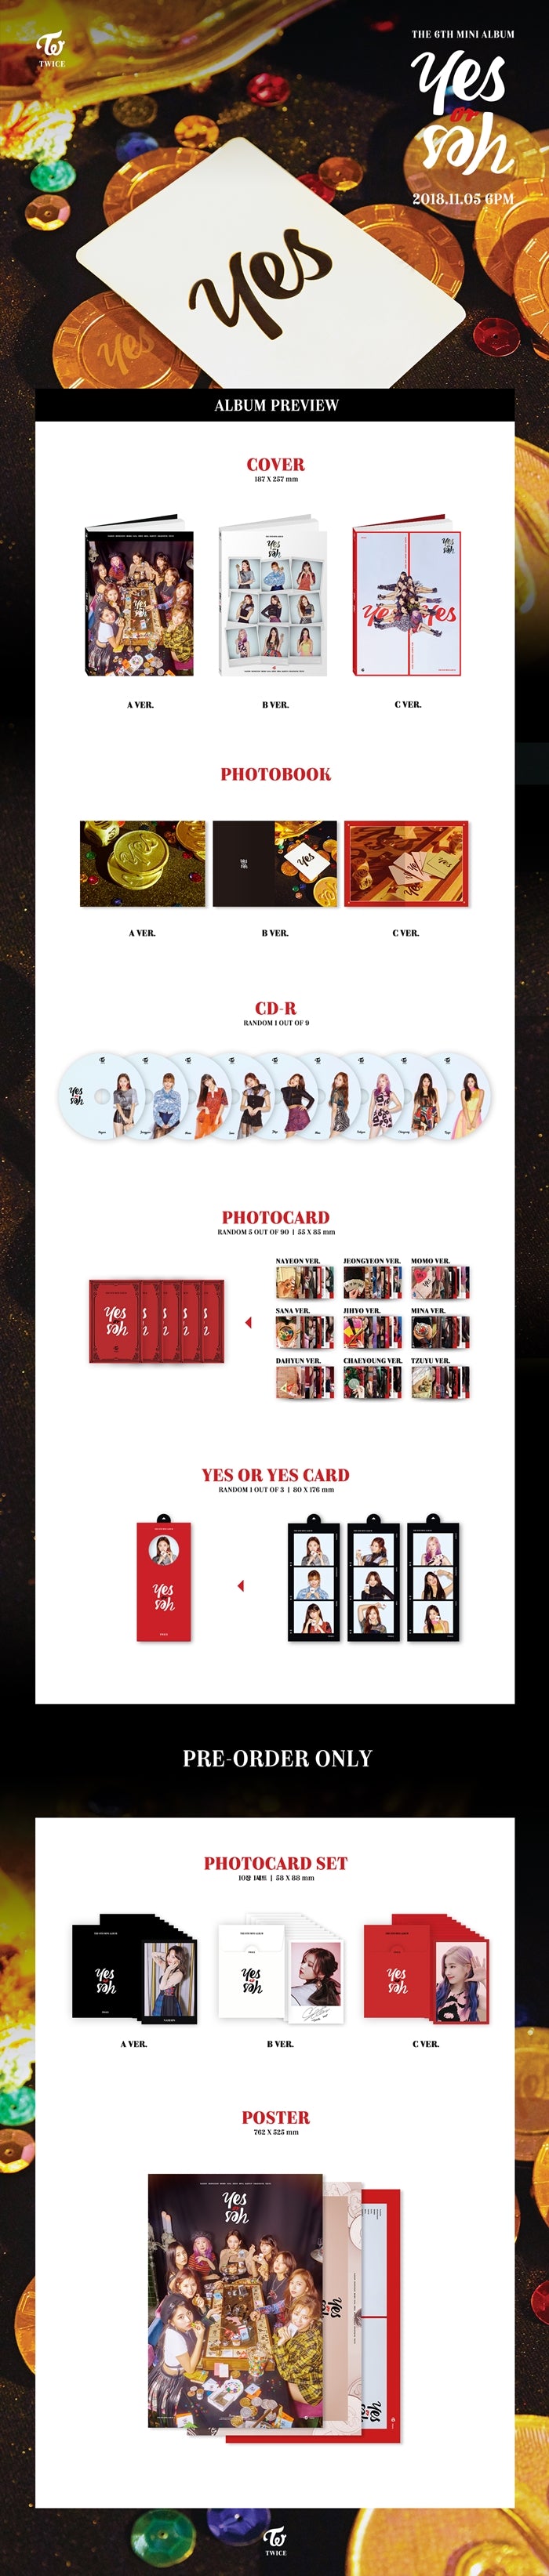 TWICE 6TH MINI ALBUM 'YES OR YES' DETAIL